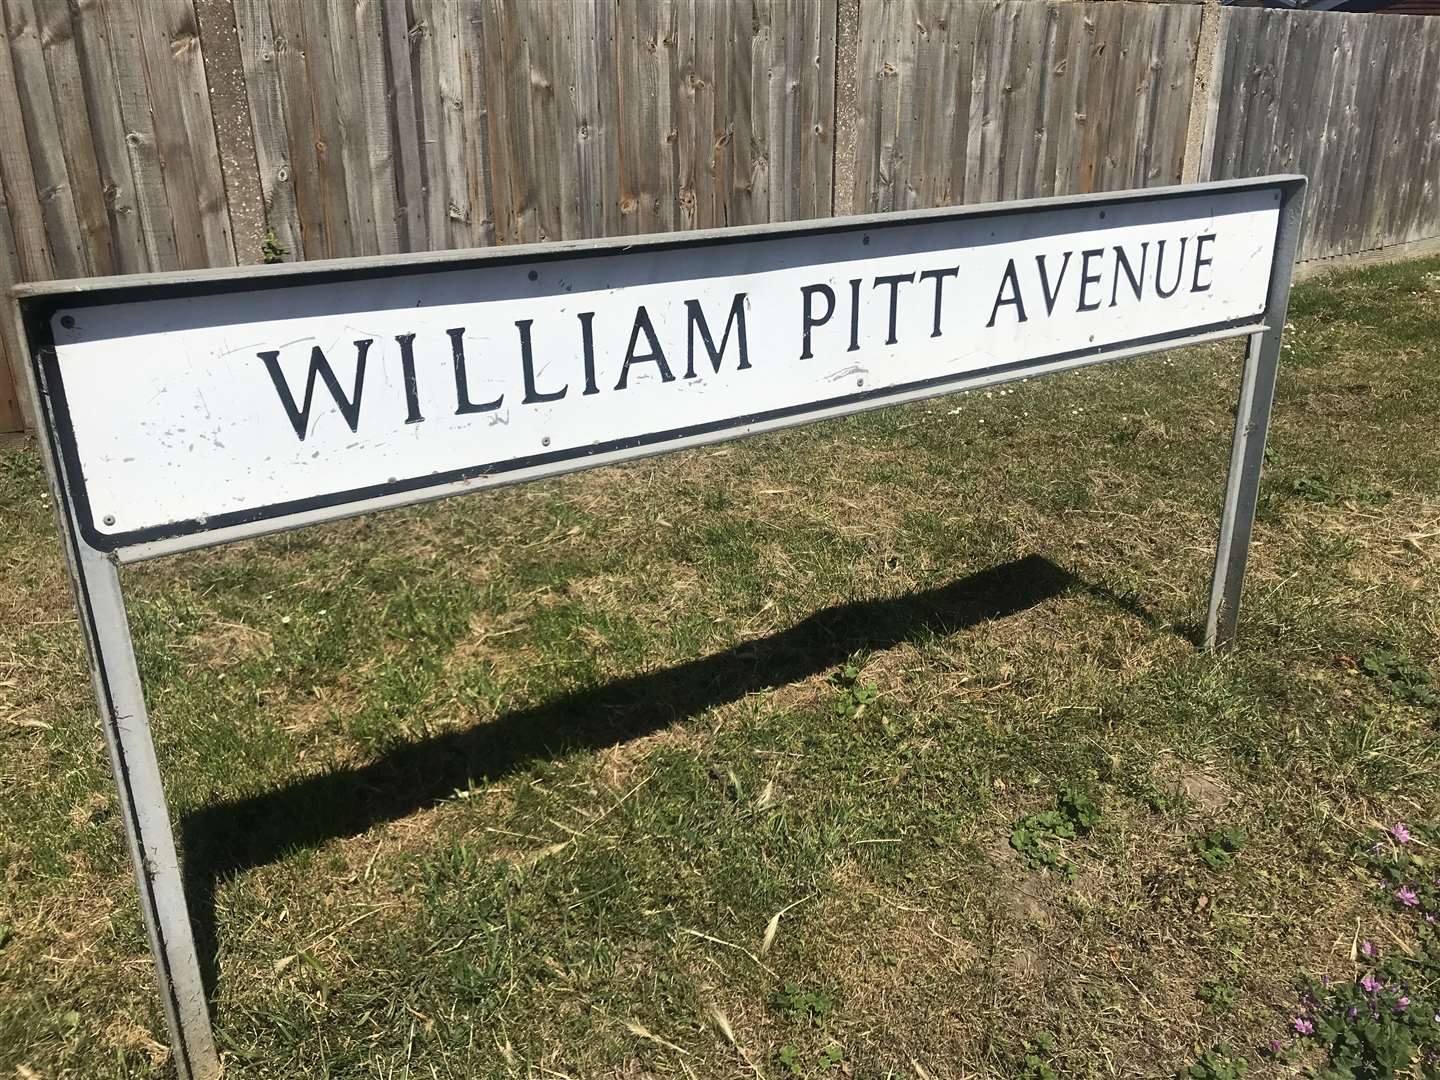 The suspicious item was found in a house in William Pitt Avenue in Deal